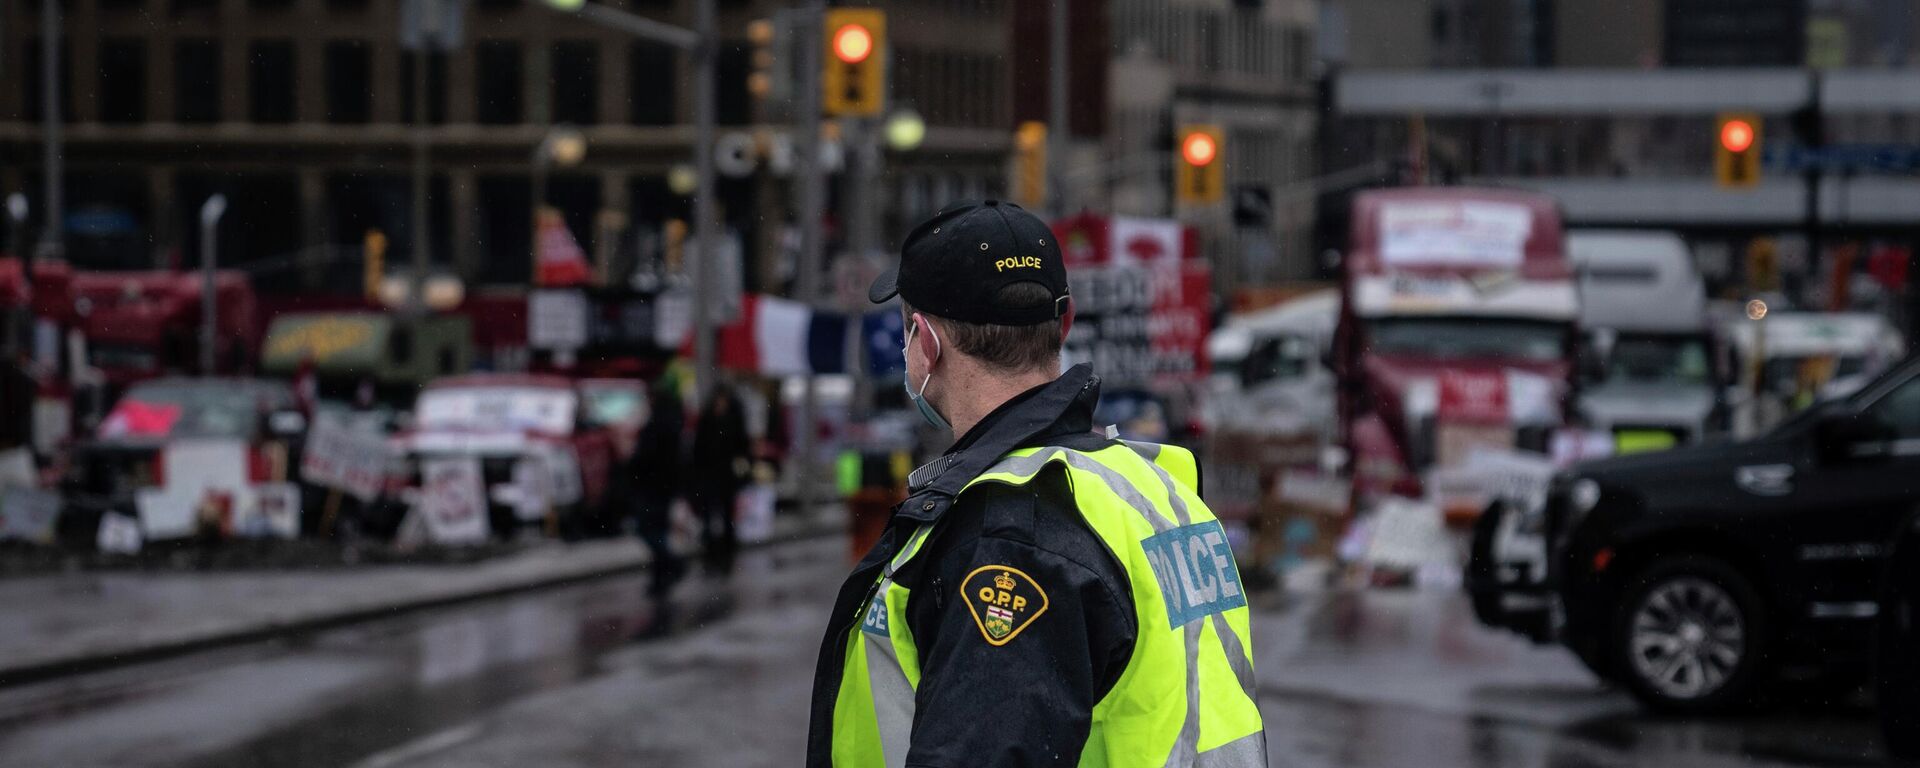 An Ontario Provincial Police officer walks in front of a row of trucks parked on the street near the Canadian parliament building in Ottawa on Thursday, Feb. 17, 2022. Hundreds of truckers clogging the streets of Canada's capital city in a protest against COVID-19 restrictions are bracing for a possible police crackdown. (AP Photo/Robert Bumsted) - Sputnik भारत, 1920, 16.05.2024